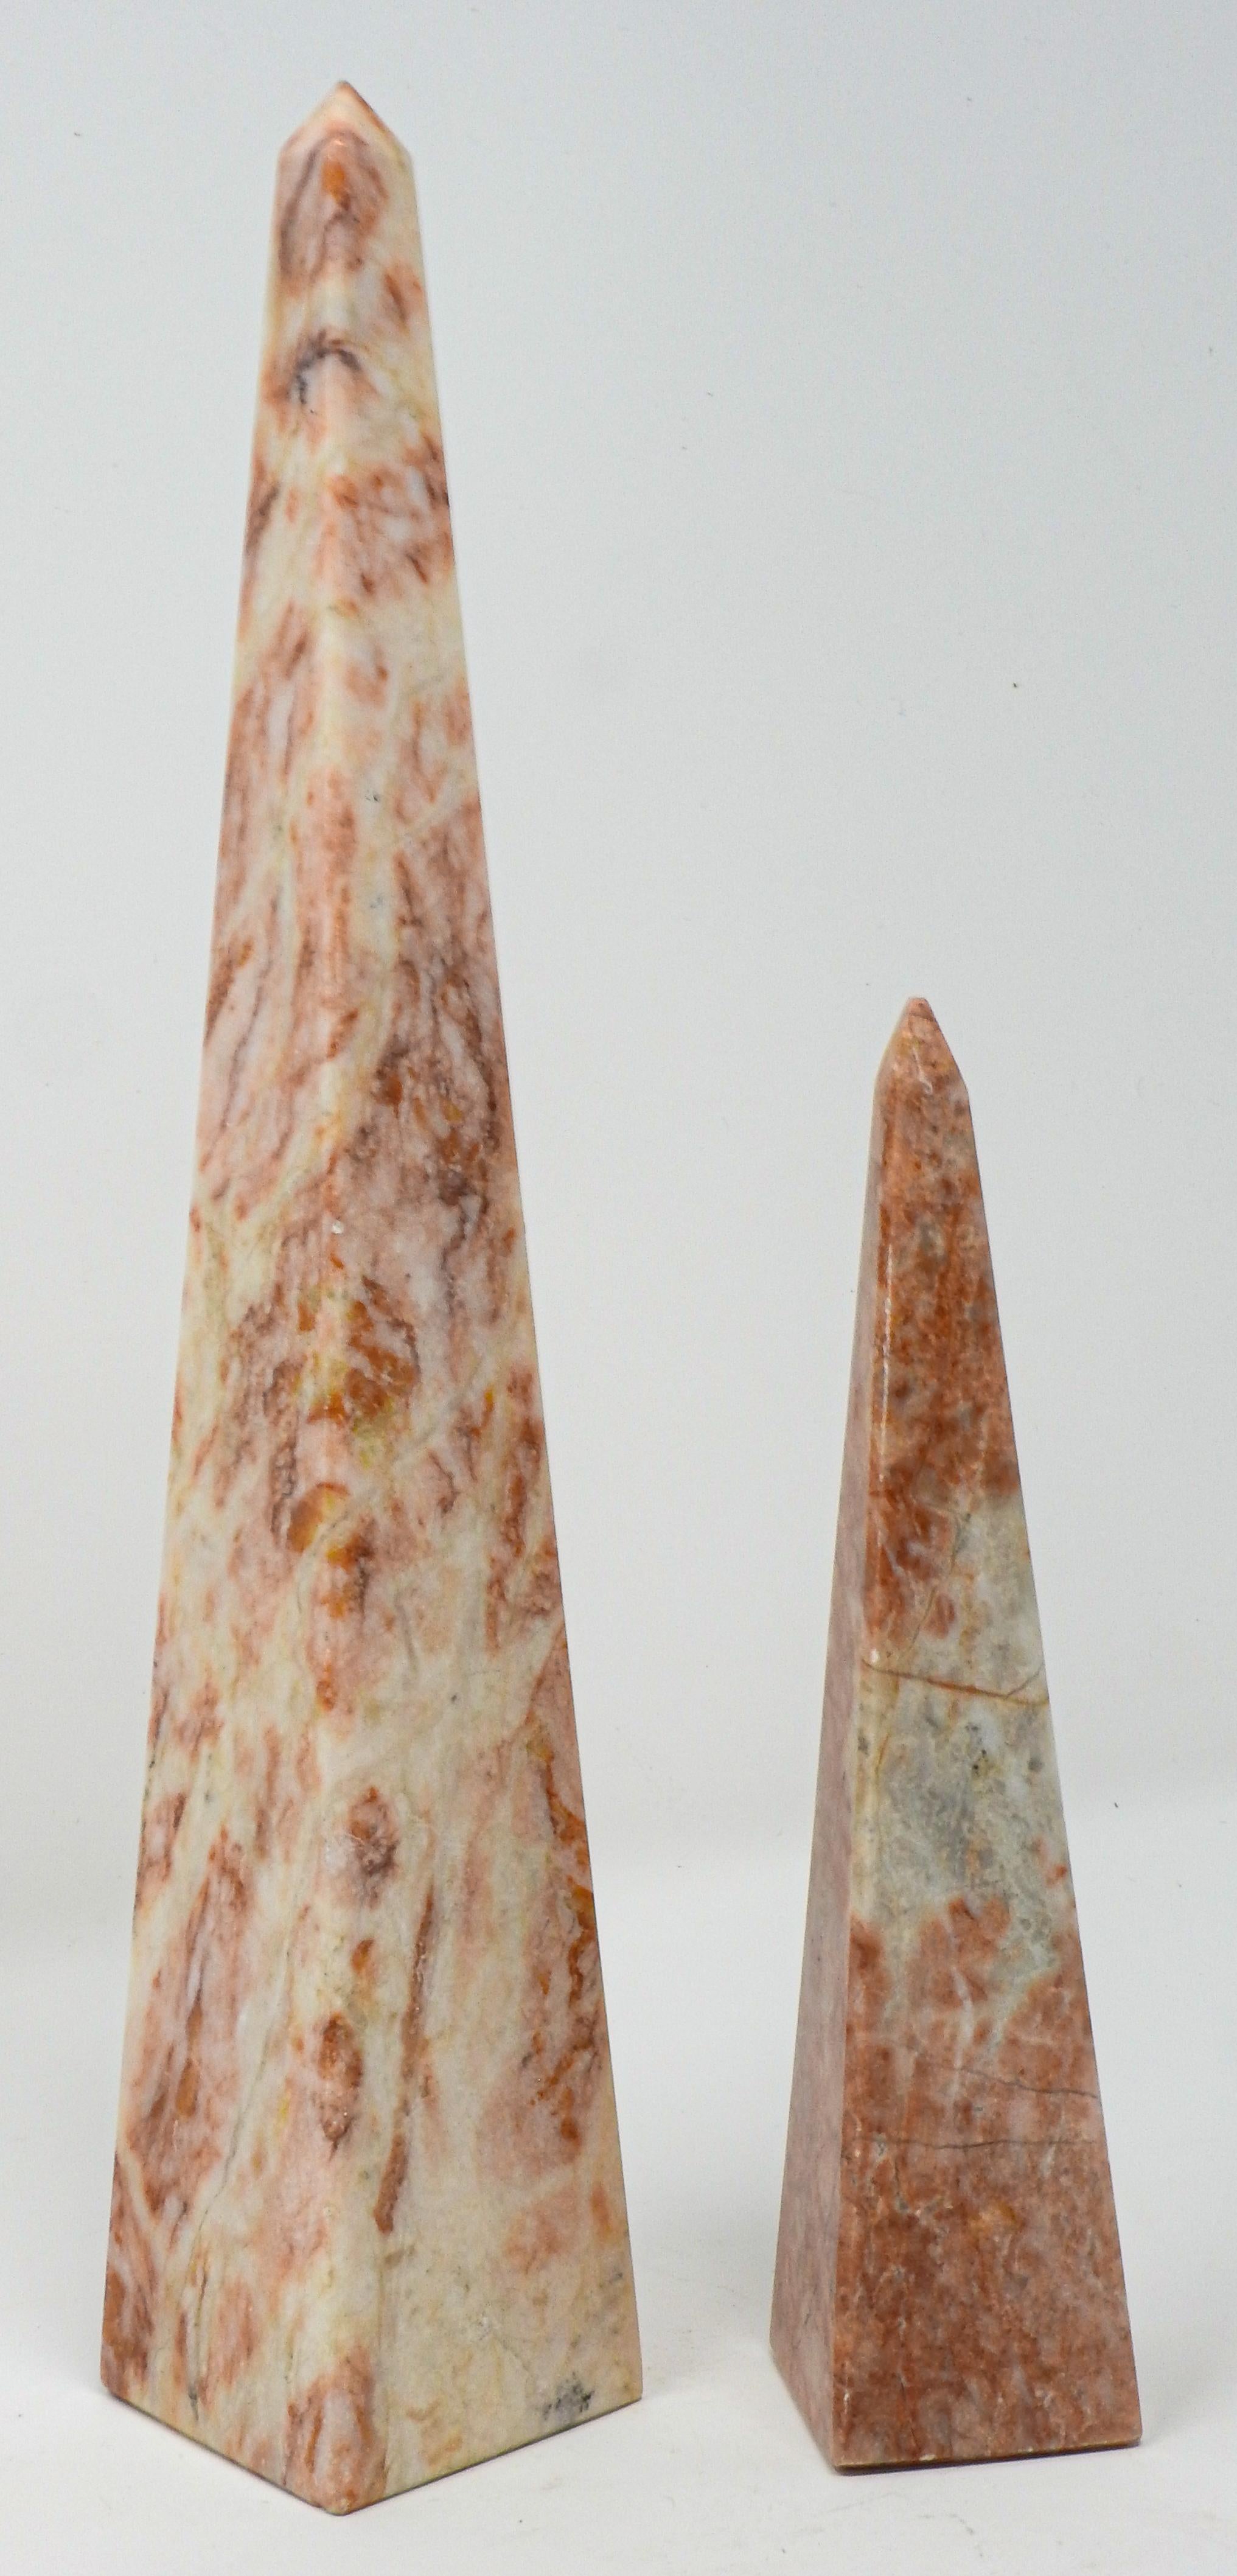 Offering this pair of vintage marble obelisk. The taller one has majority white with pink and salmon colored veining. The smaller of the two is more of the pink and salmon color with splashes of white and grey. Obelisk are great home accents to add